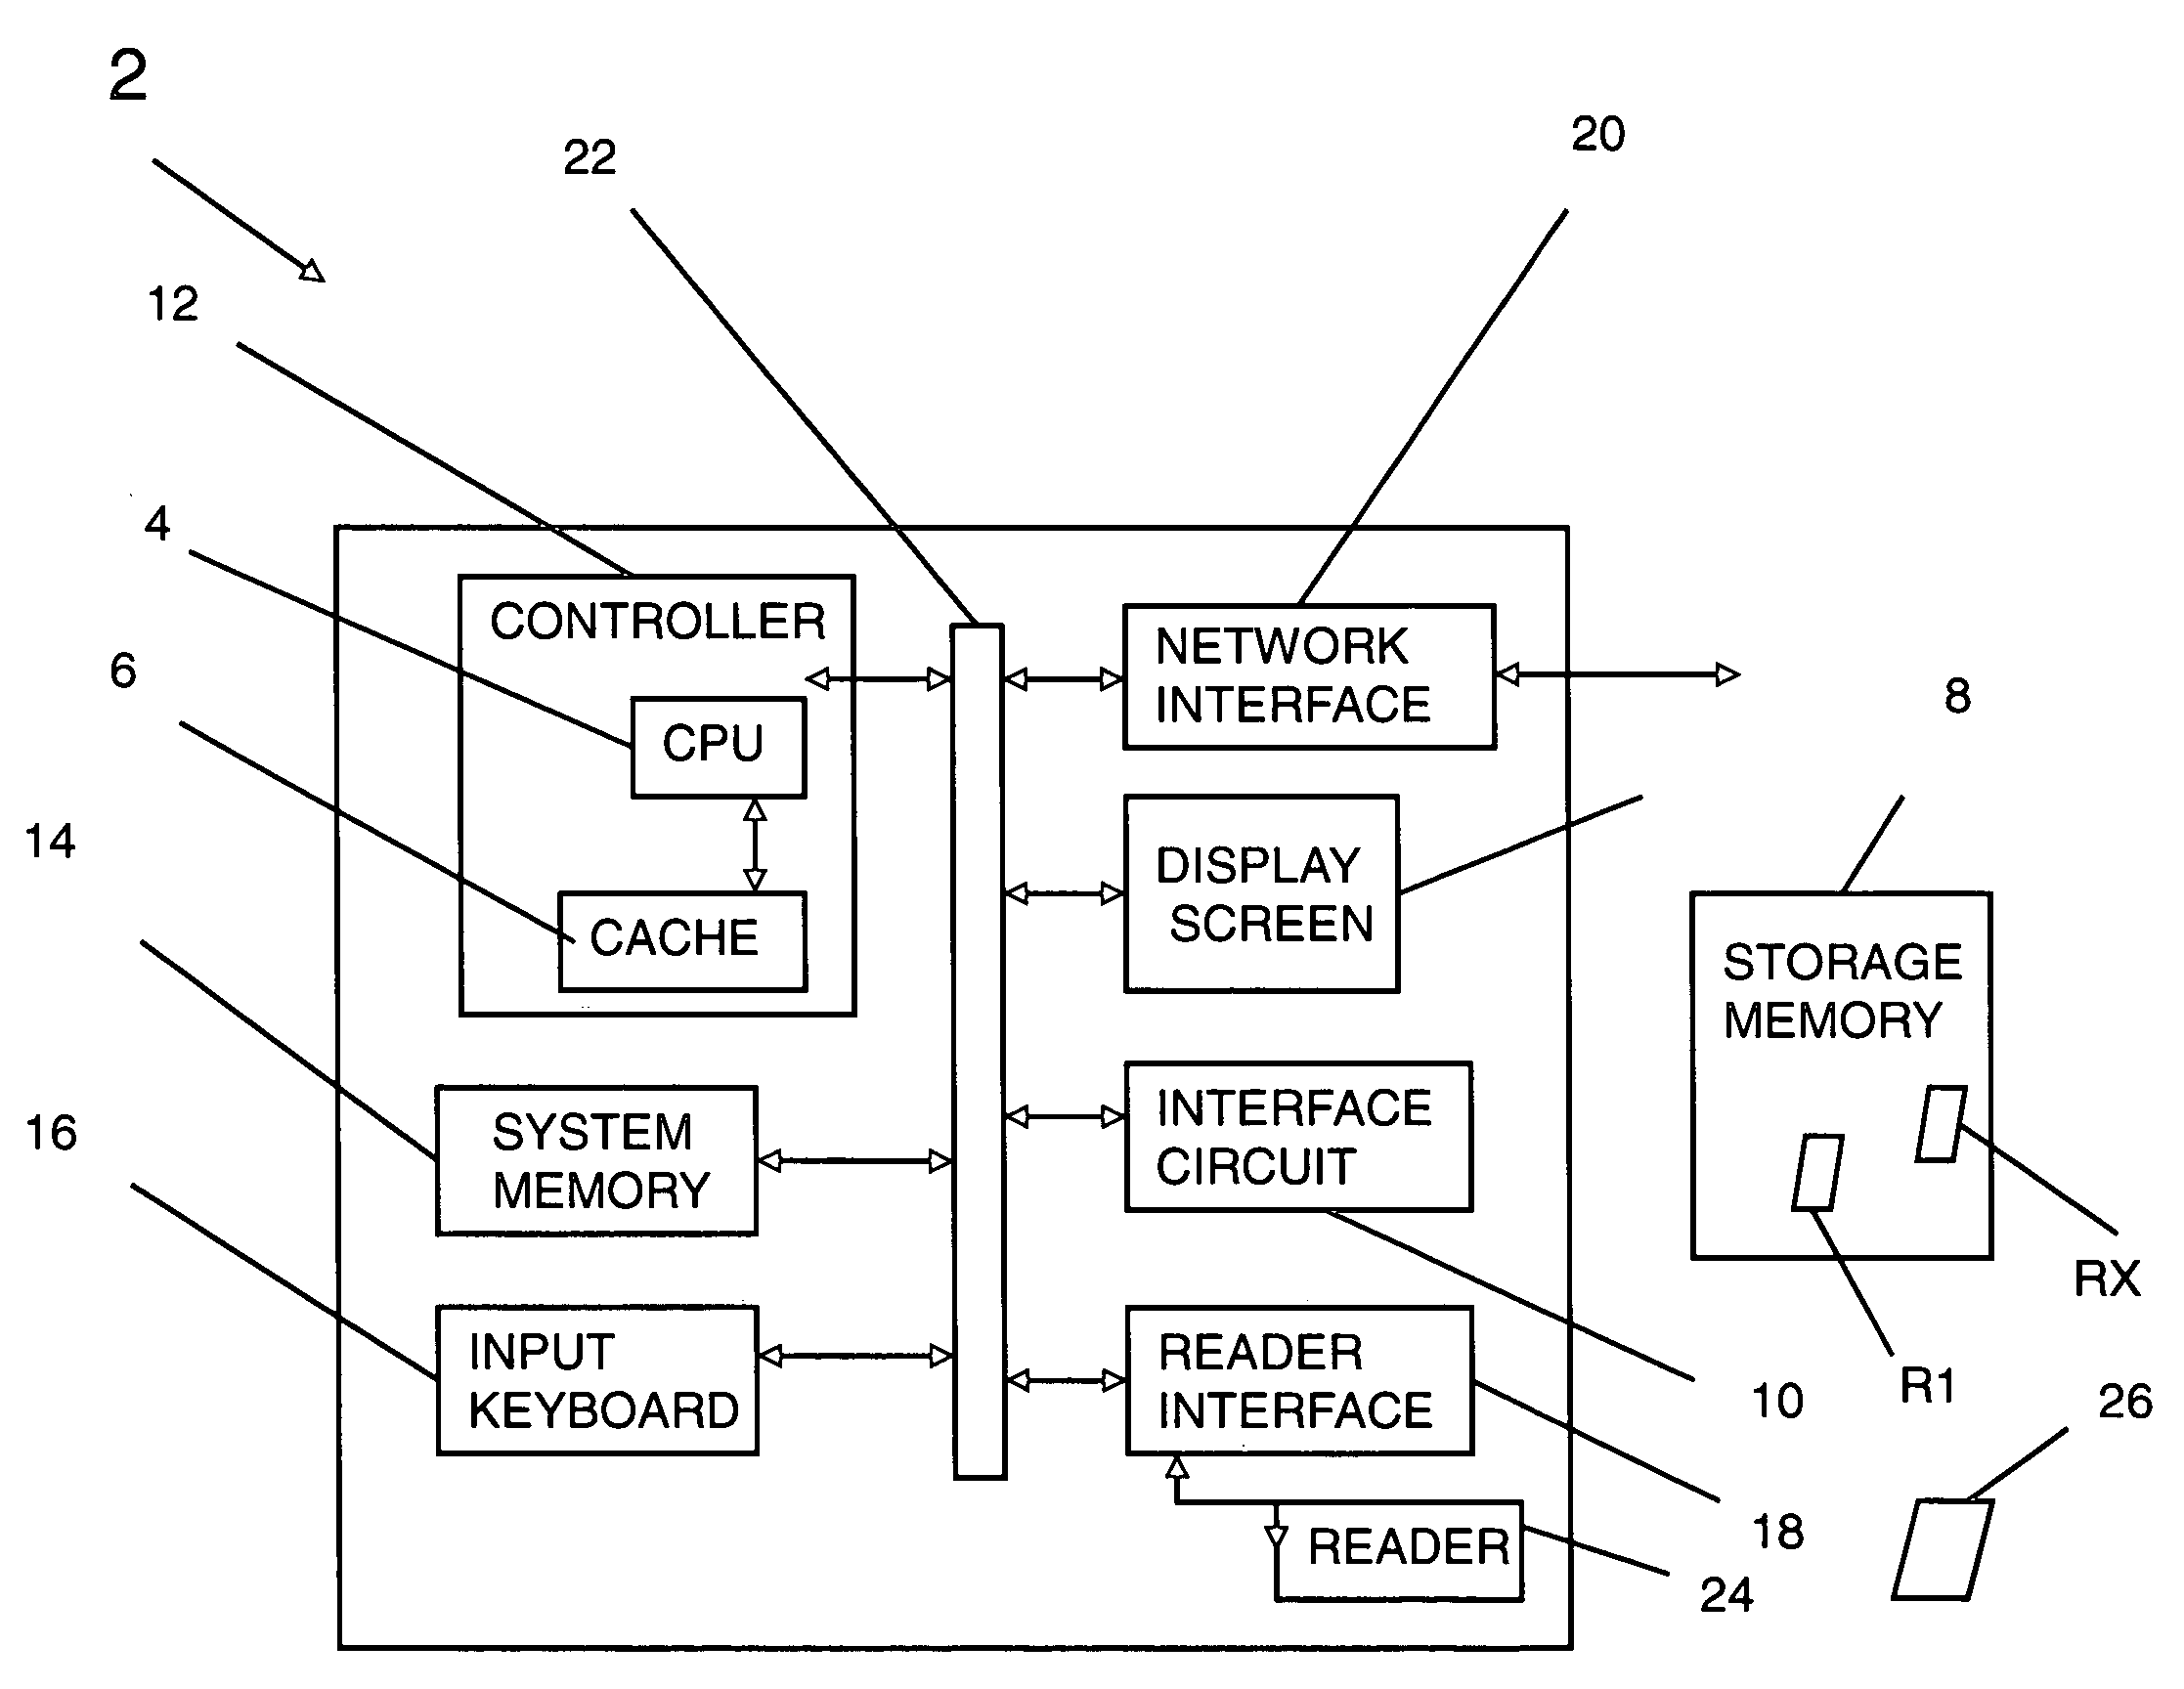 Method, system and computer-readable media for managing software object handles in a dual threaded environment